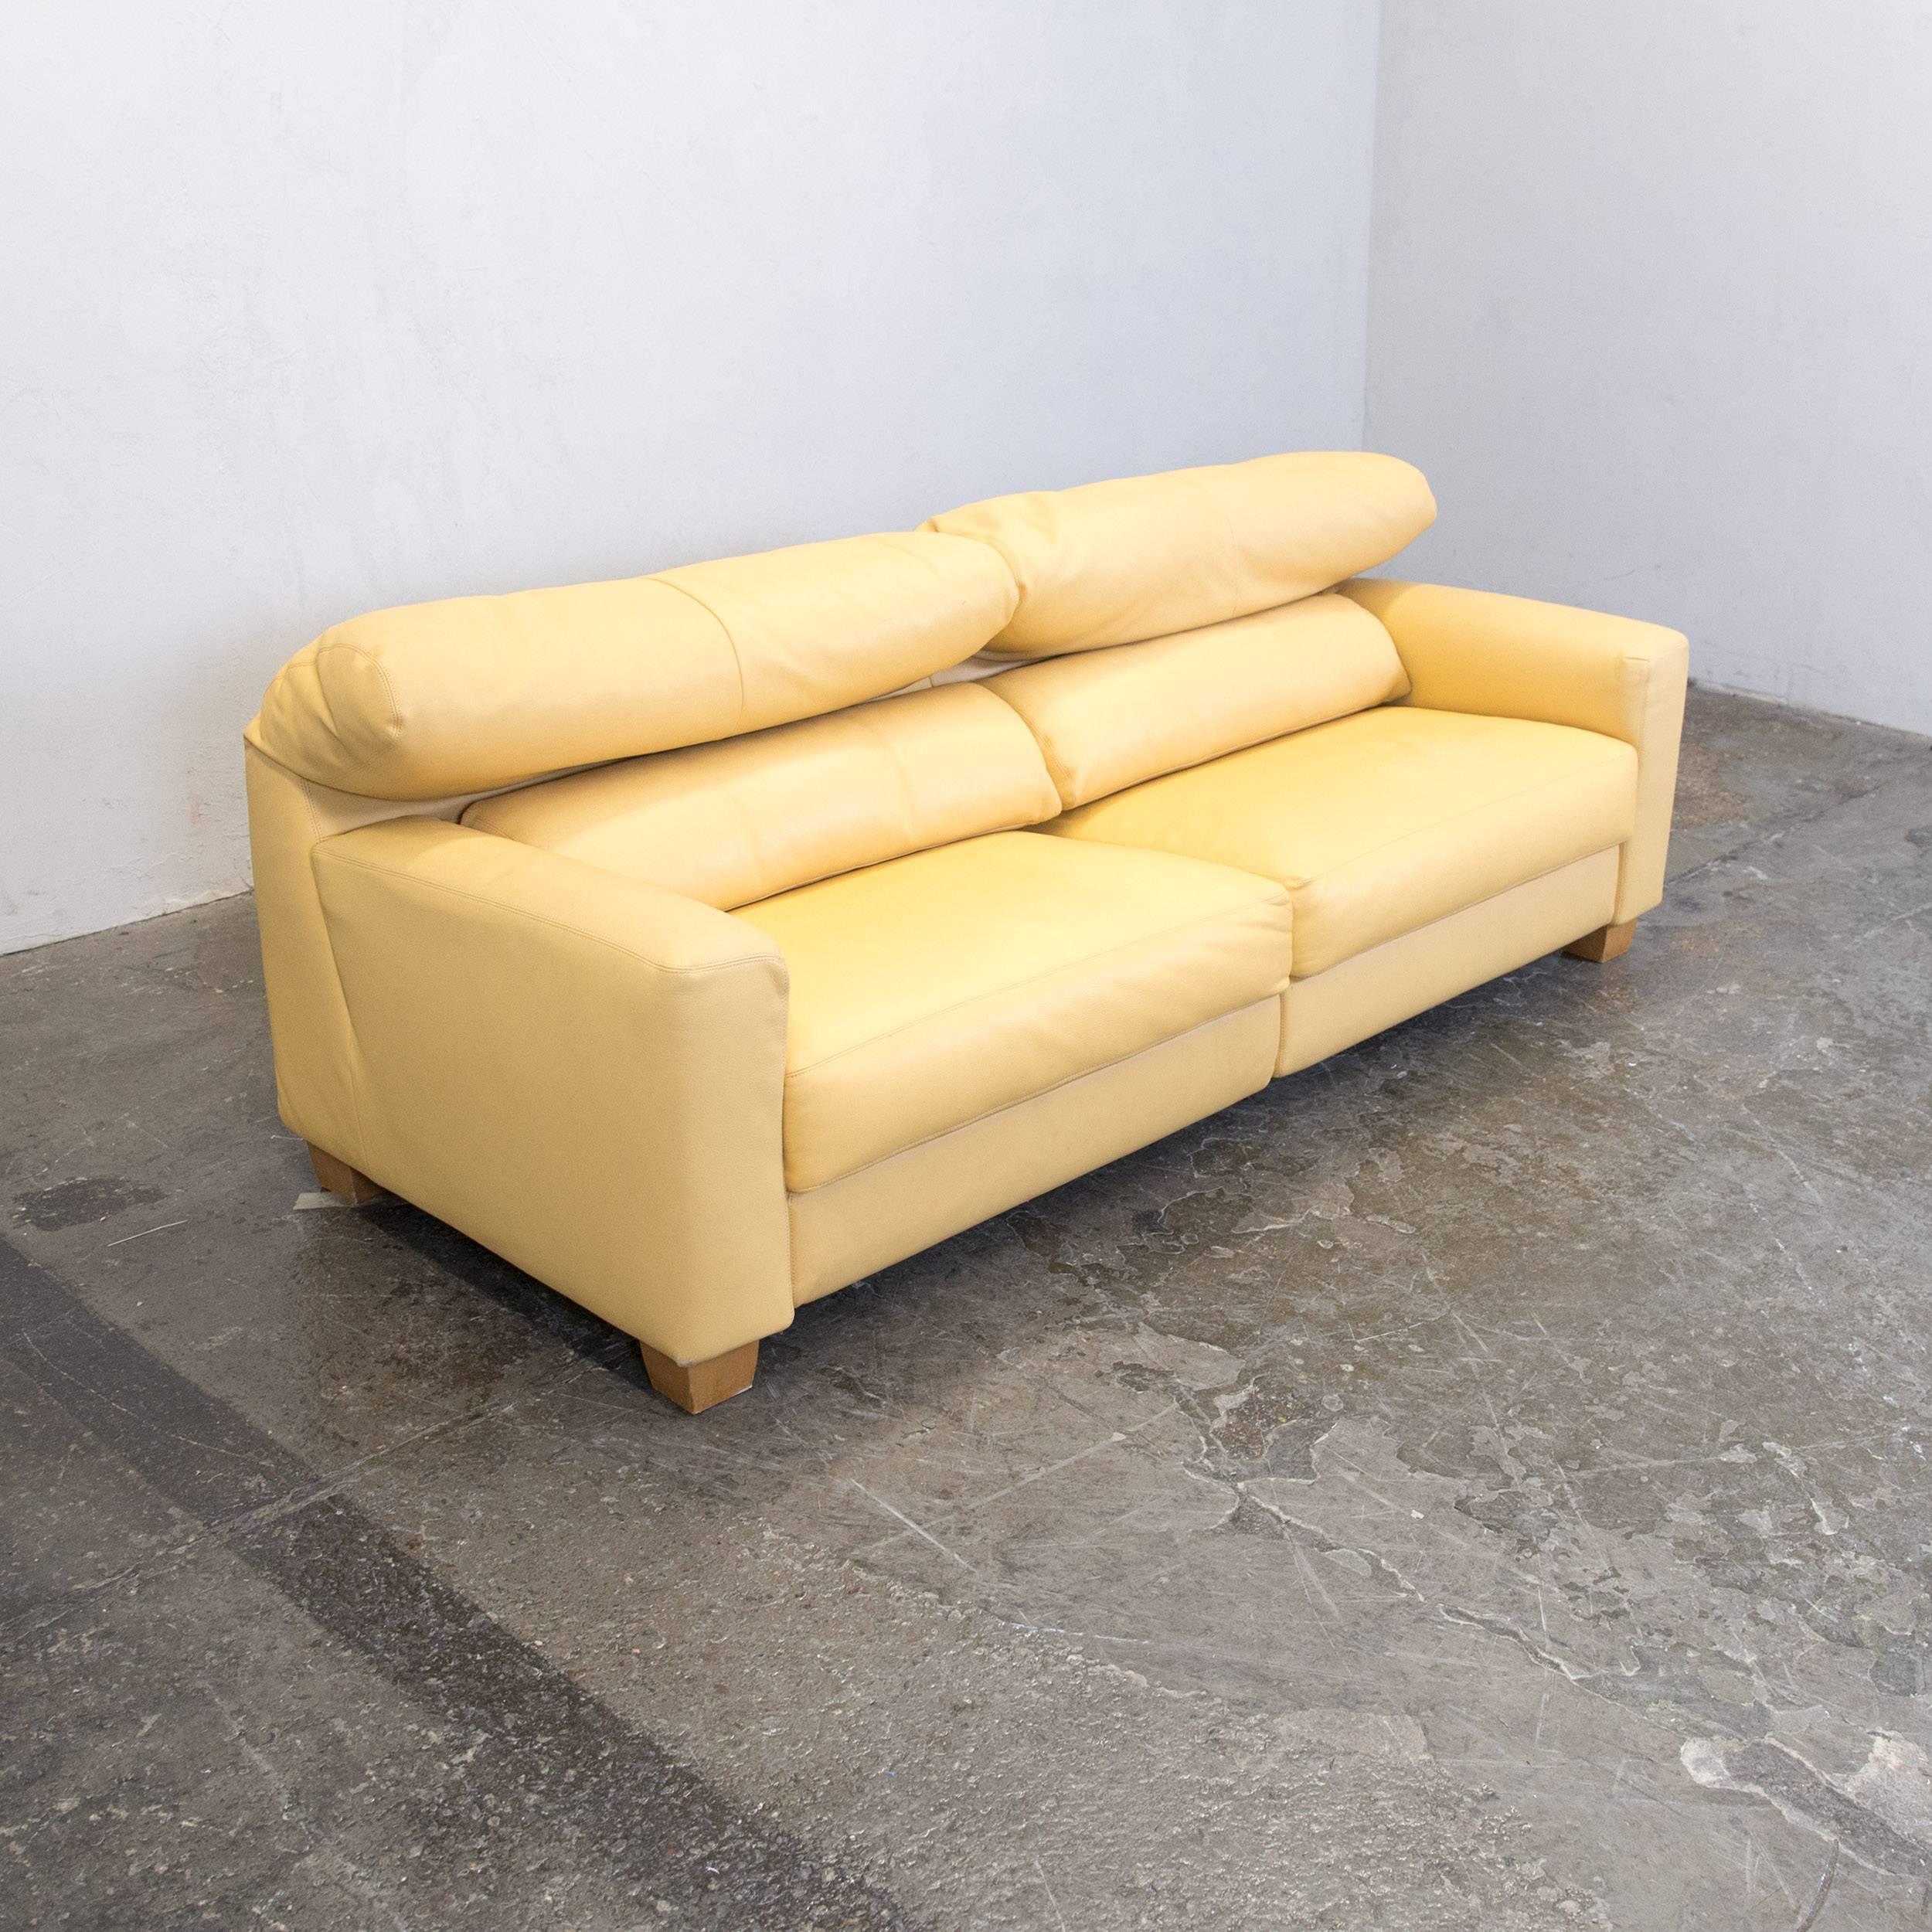 Swiss FSM Leather Couch Relax Function Three-Seat Sofa Yellow Orange